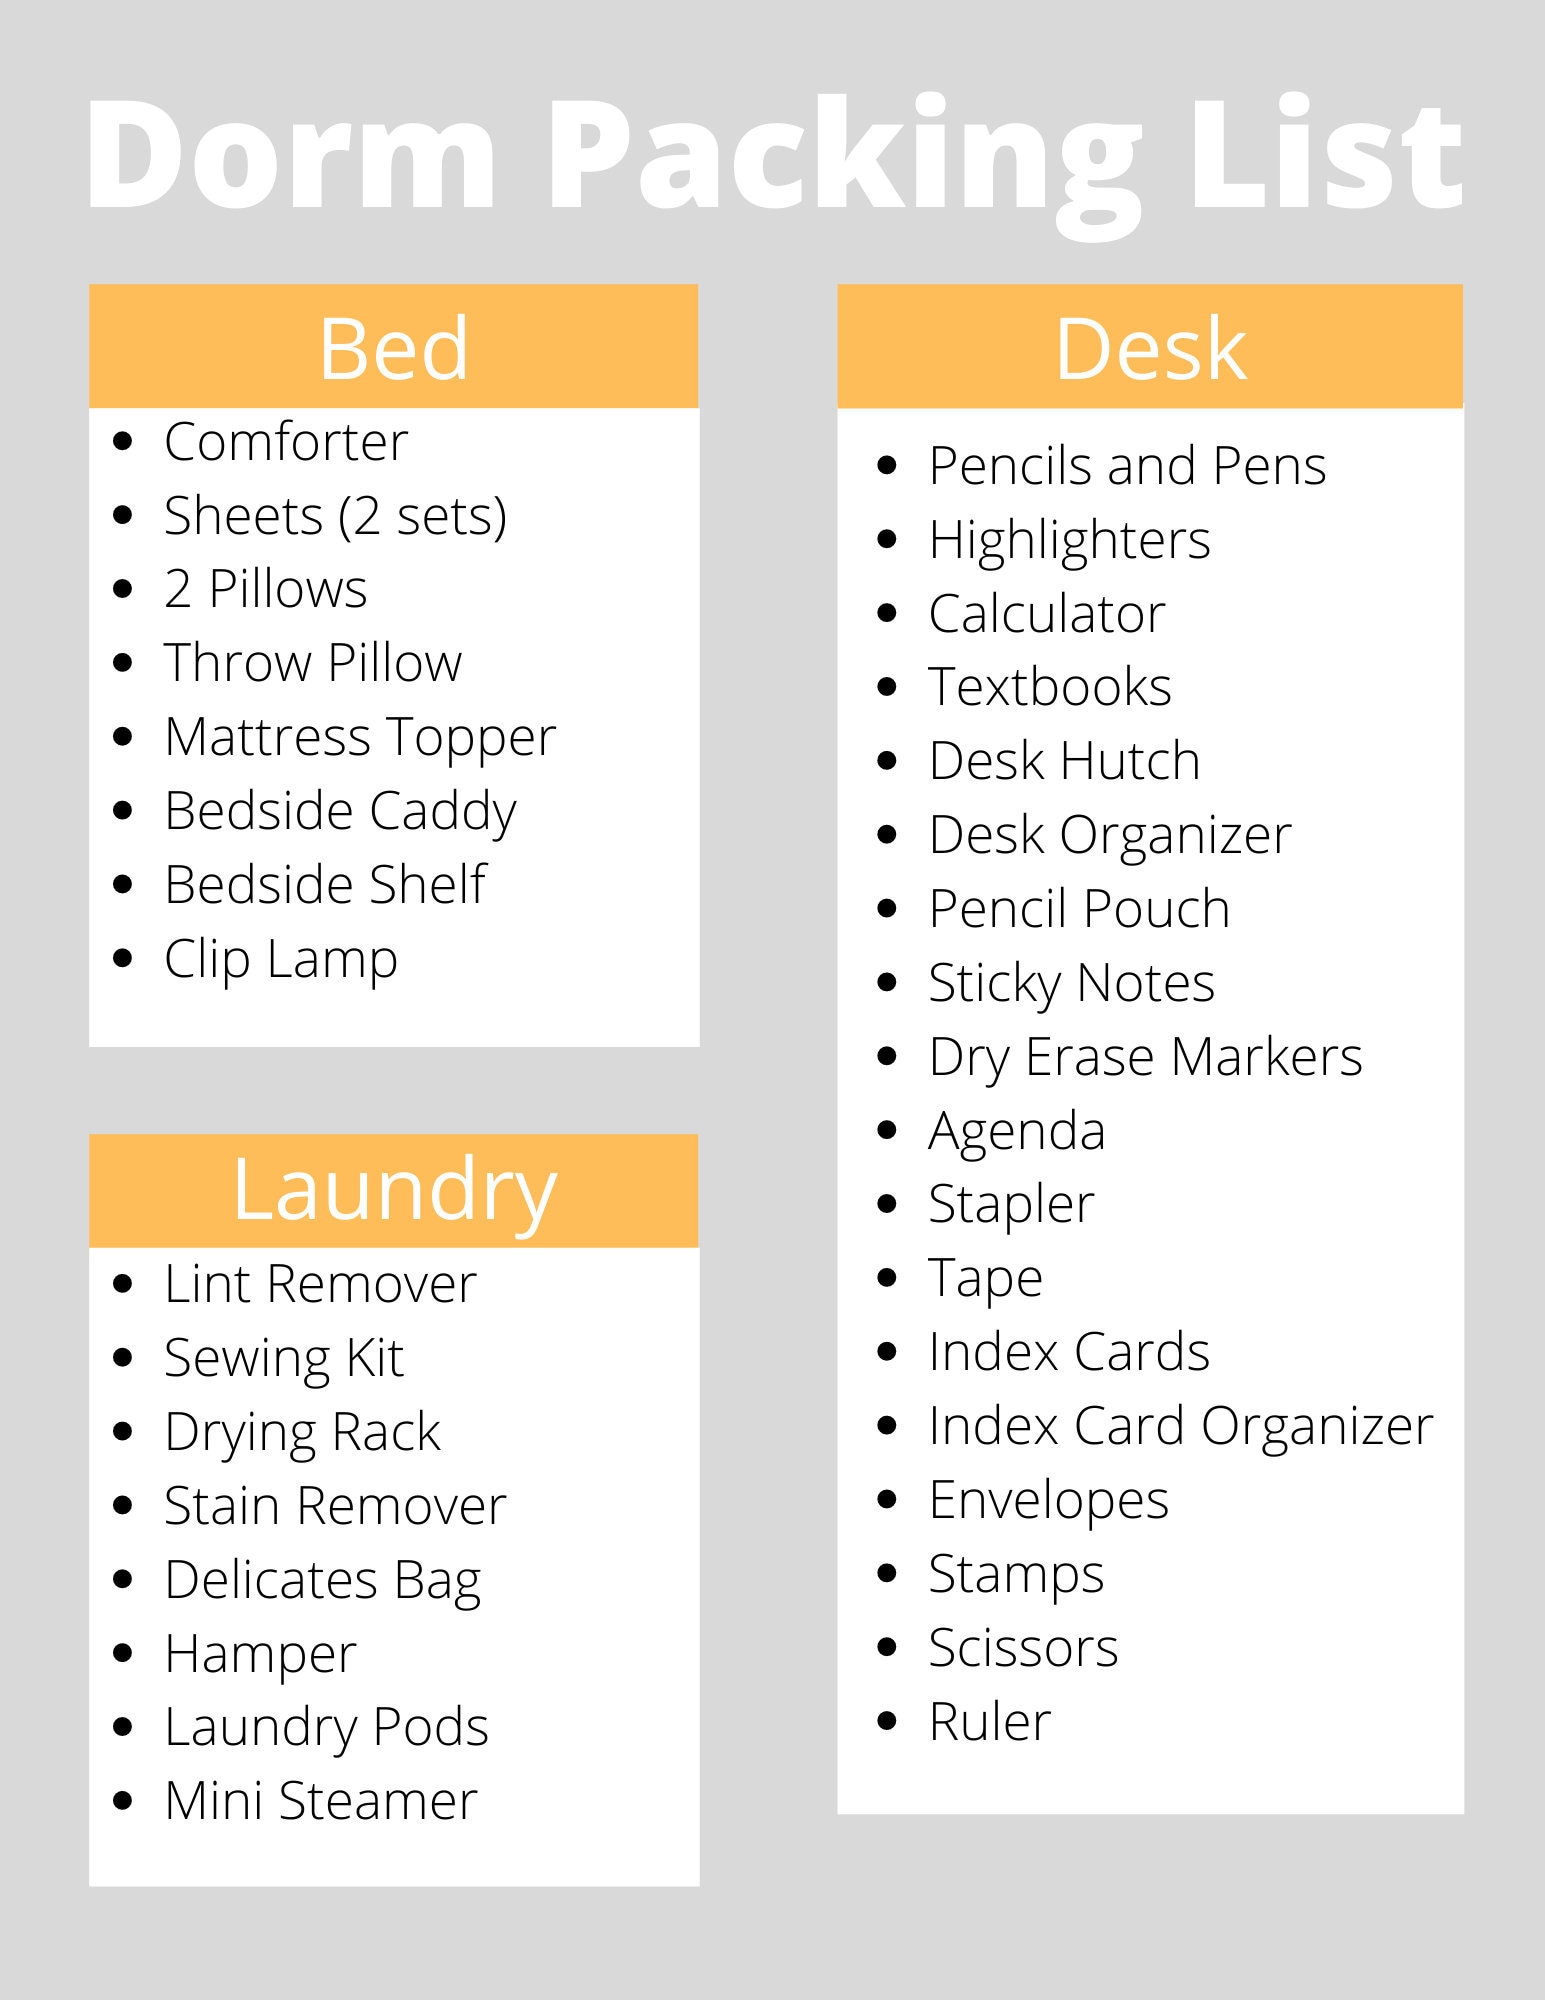 Ultimate Packing Checklist for Your College Apartment